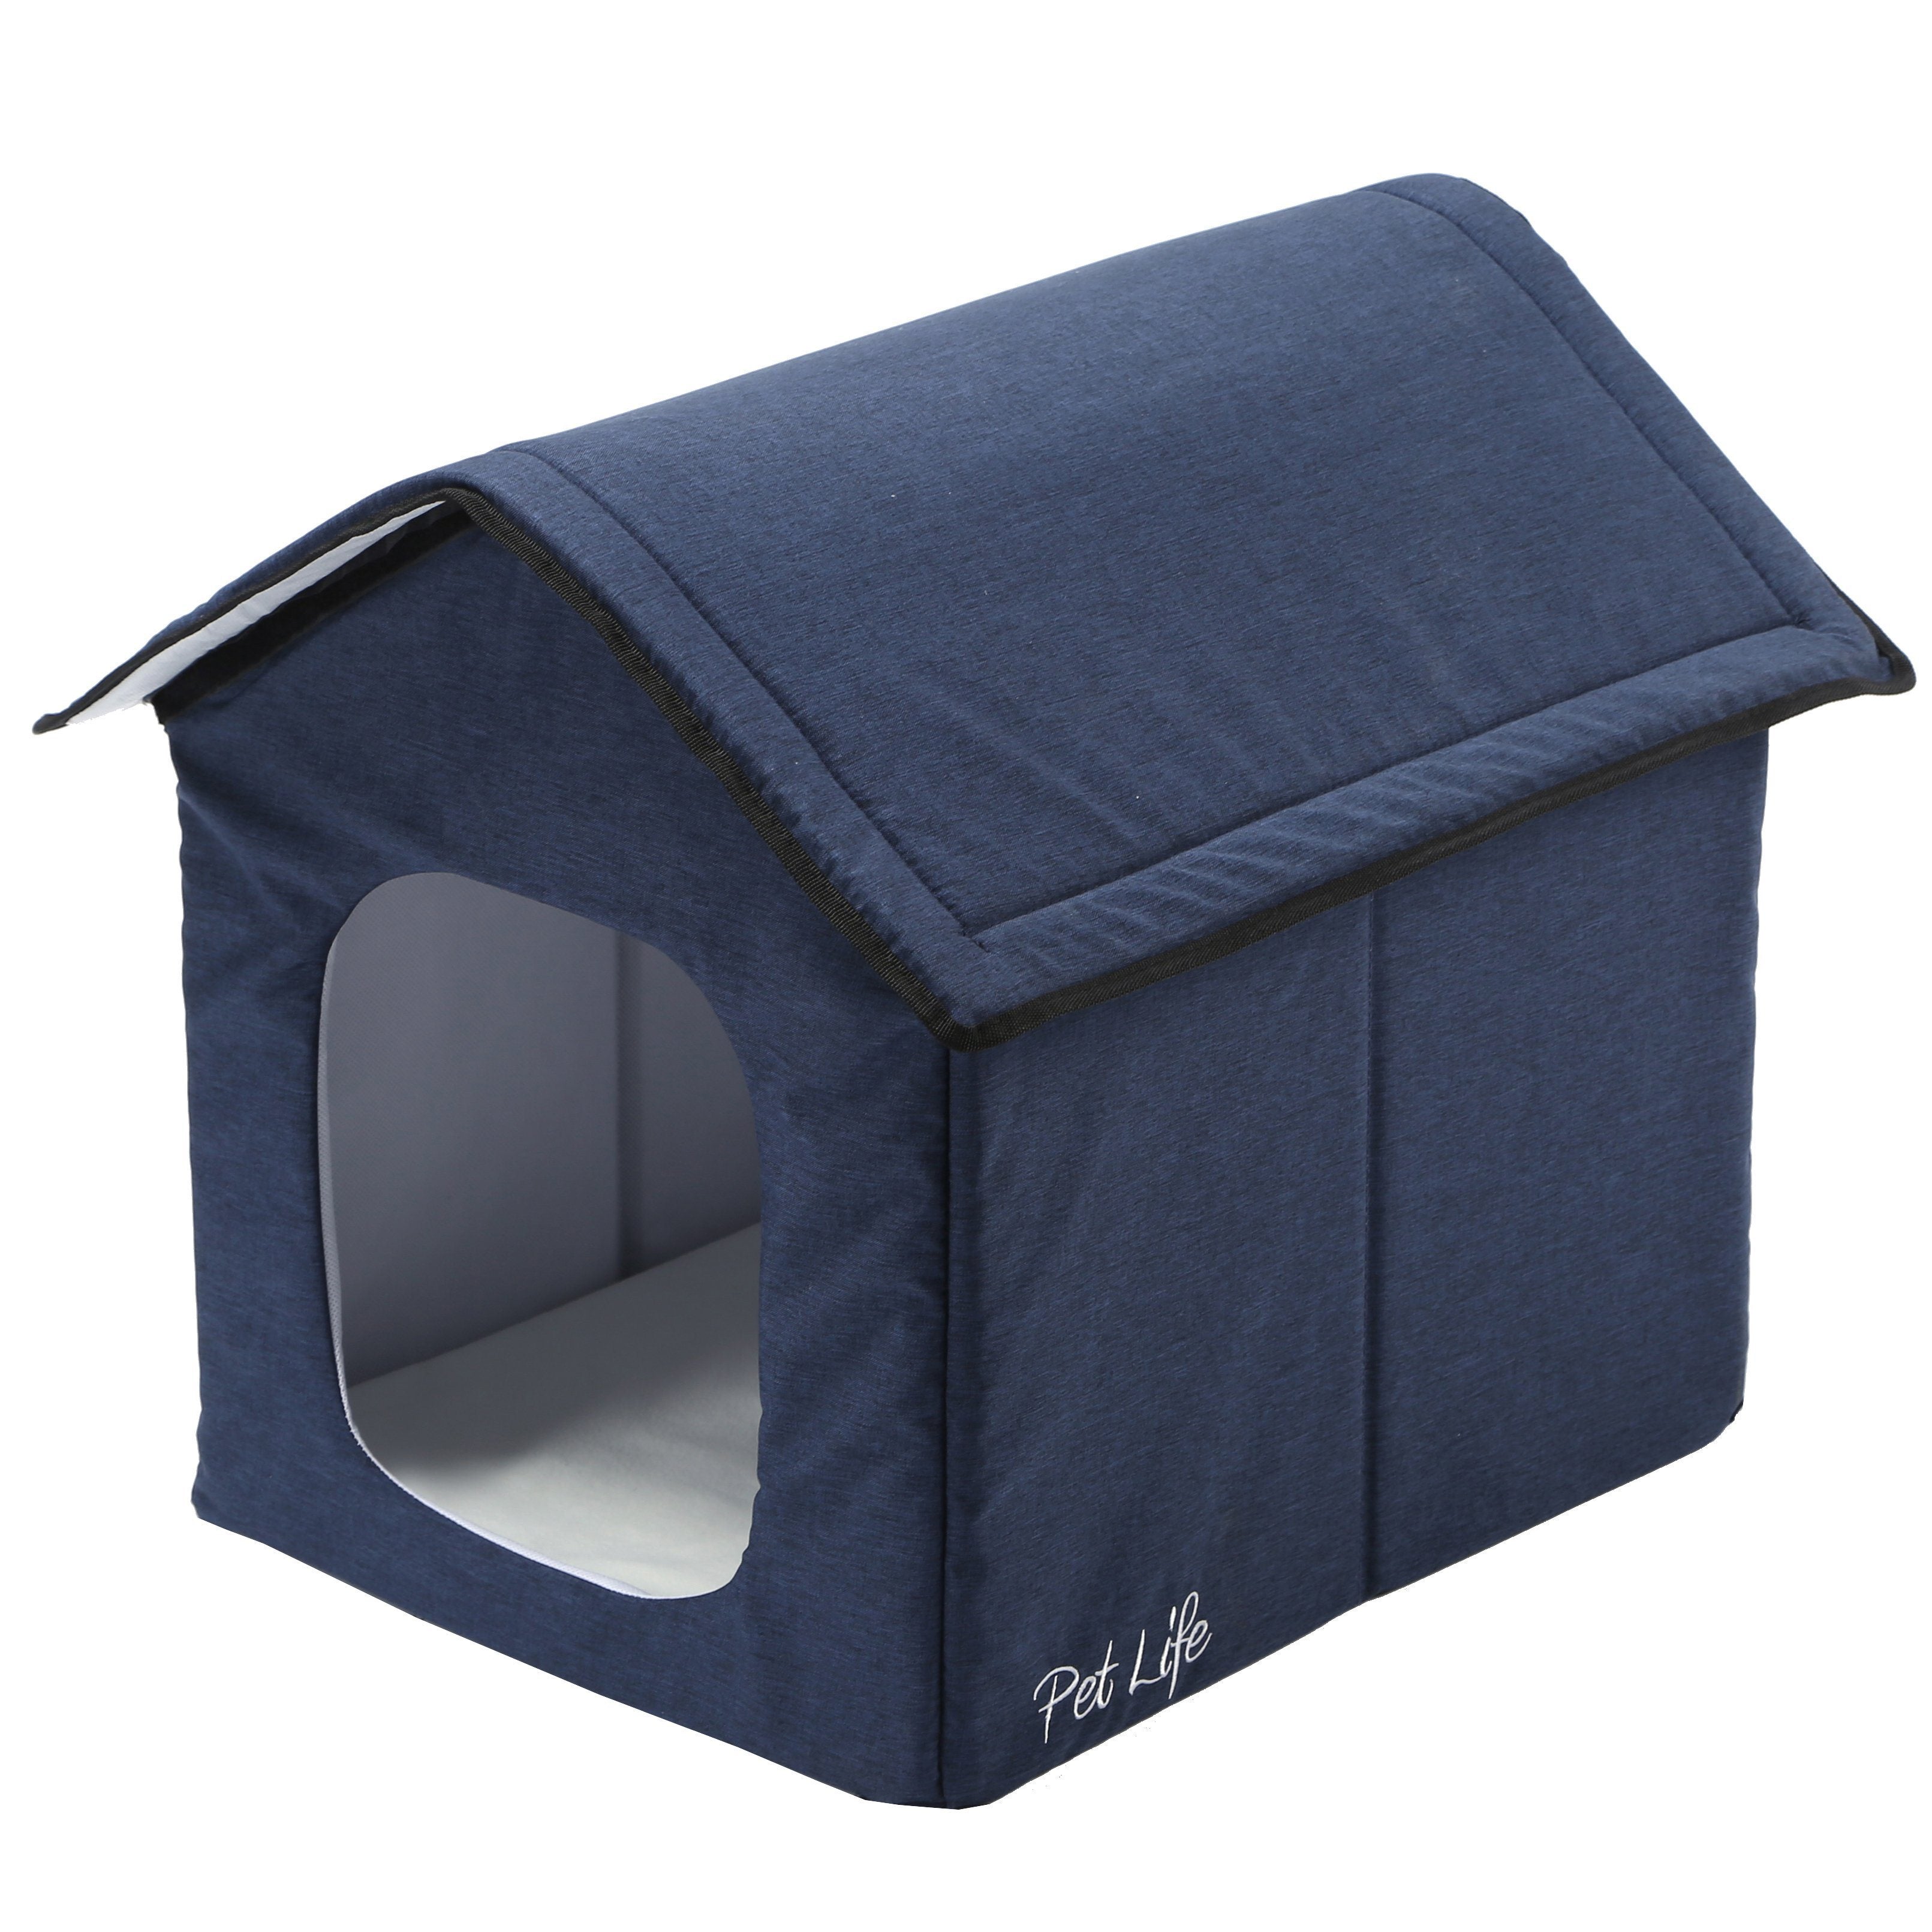 Pet Life 'Hush Puppy' Collapsible Electronic Heating and Cooling Smart Pet House  